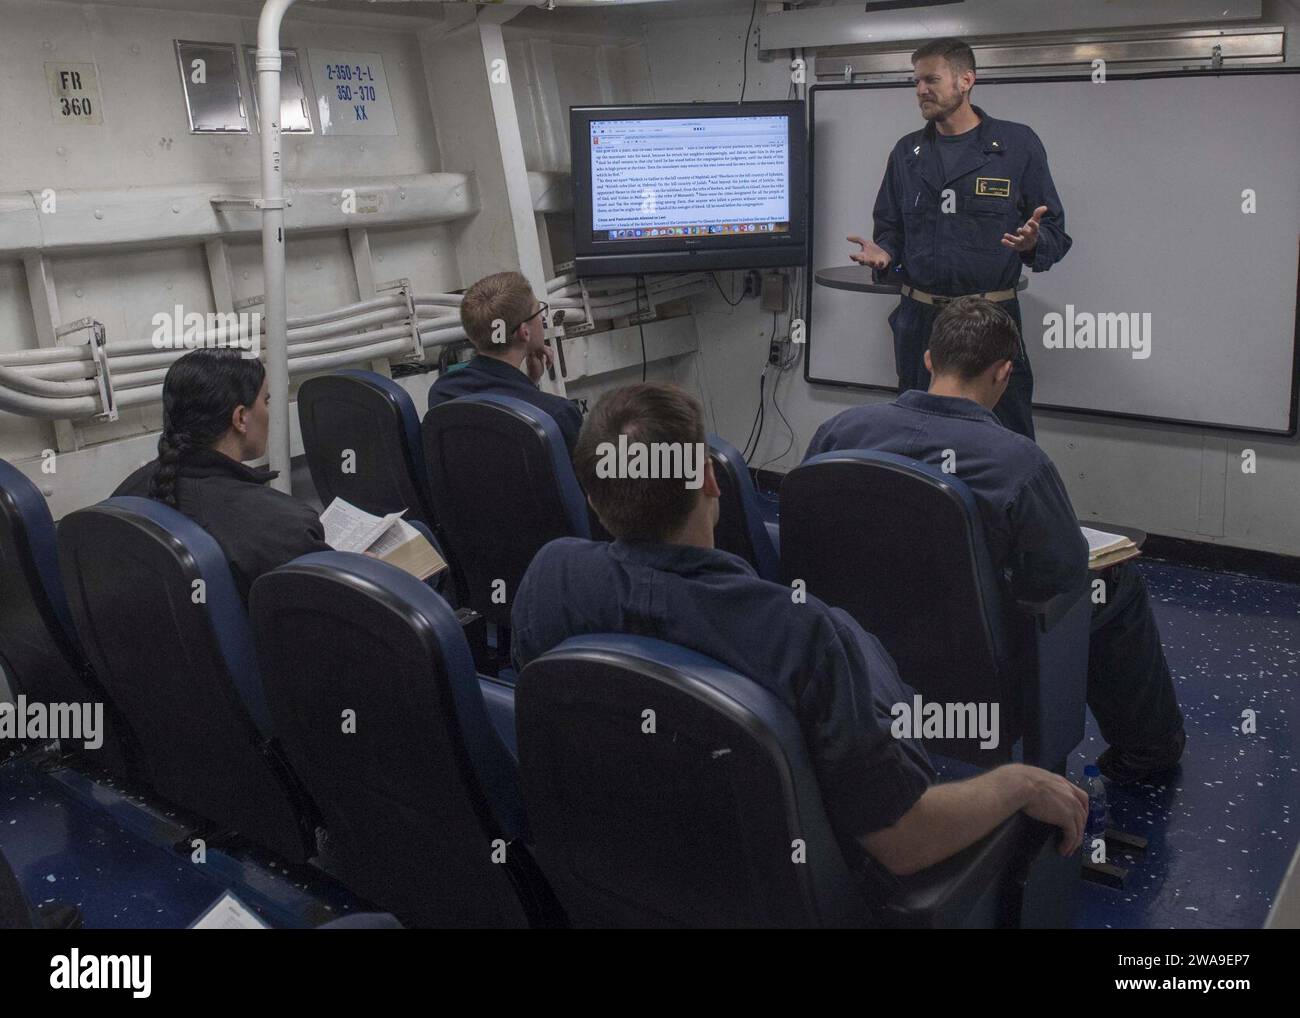 US military forces. 180708IC246-0005 MEDITERRANEAN SEA (July 8, 2018) Lt. Aaron Chicoine gives a sermon aboard guided-missile destroyer USS Arleigh Burke (DDG 51). With the aircraft carrier USS Harry S. Truman (CVN 75) as the flagship, deploying strike group assists include staffs, ships, and aircraft of Carrier Strike Group (CSG) 8, Destroyer Squadron (DESRON) 28 and Carrier Air Wing (CVW) 1; as well as Sachen-class German Frigate FGS Hessen (F 221). (U.S. Navy photo by Mass Communication Specialist Seaman Raymond Maddocks/Released) Stock Photo